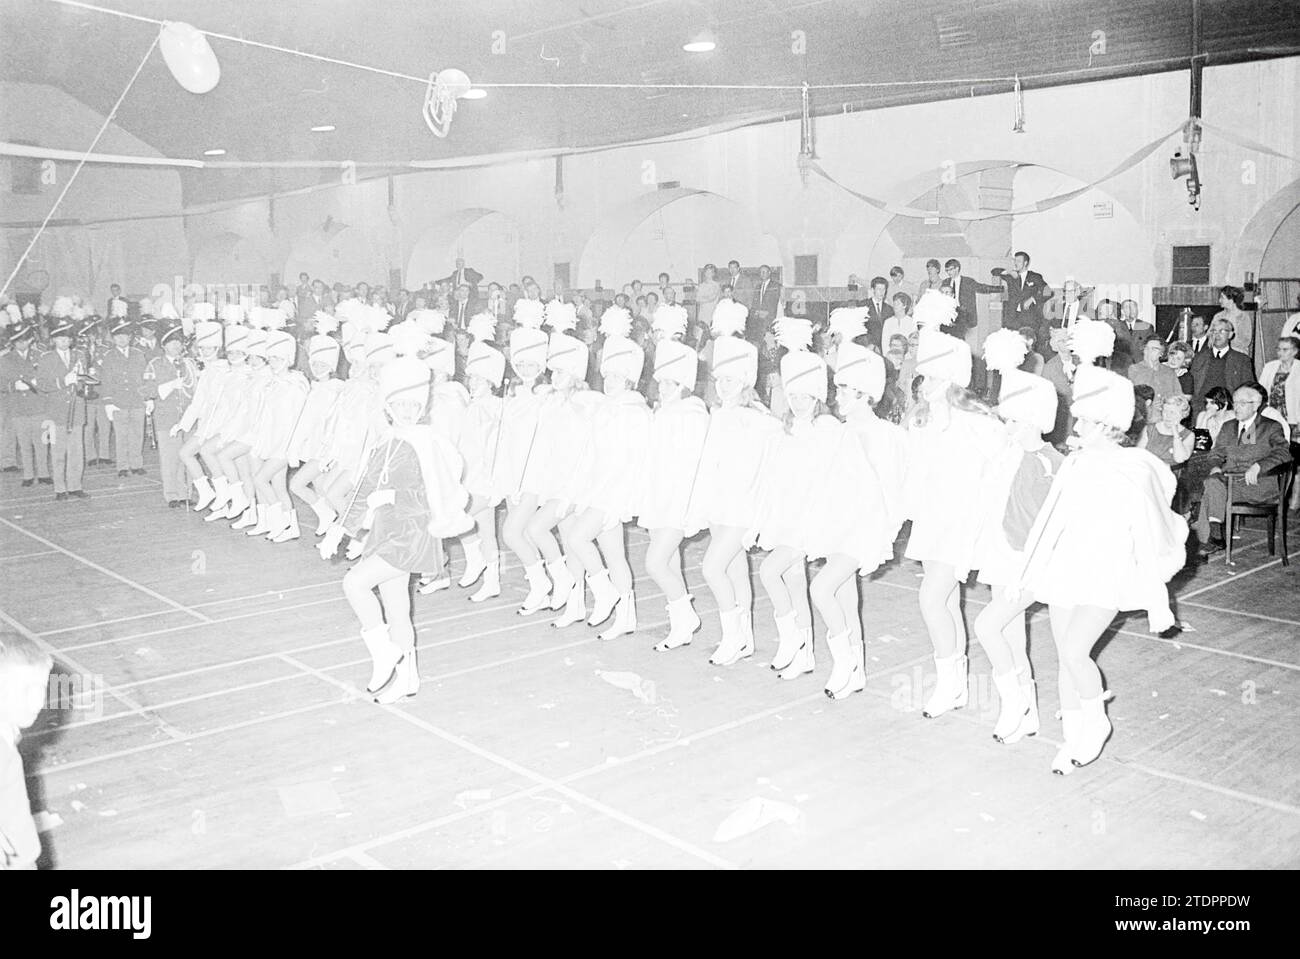 Majorettes H.H.K., Music, 30-03-1968, Whizgle News from the Past, Tailored for the Future. Explore historical narratives, Dutch The Netherlands agency image with a modern perspective, bridging the gap between yesterday's events and tomorrow's insights. A timeless journey shaping the stories that shape our future Stock Photo